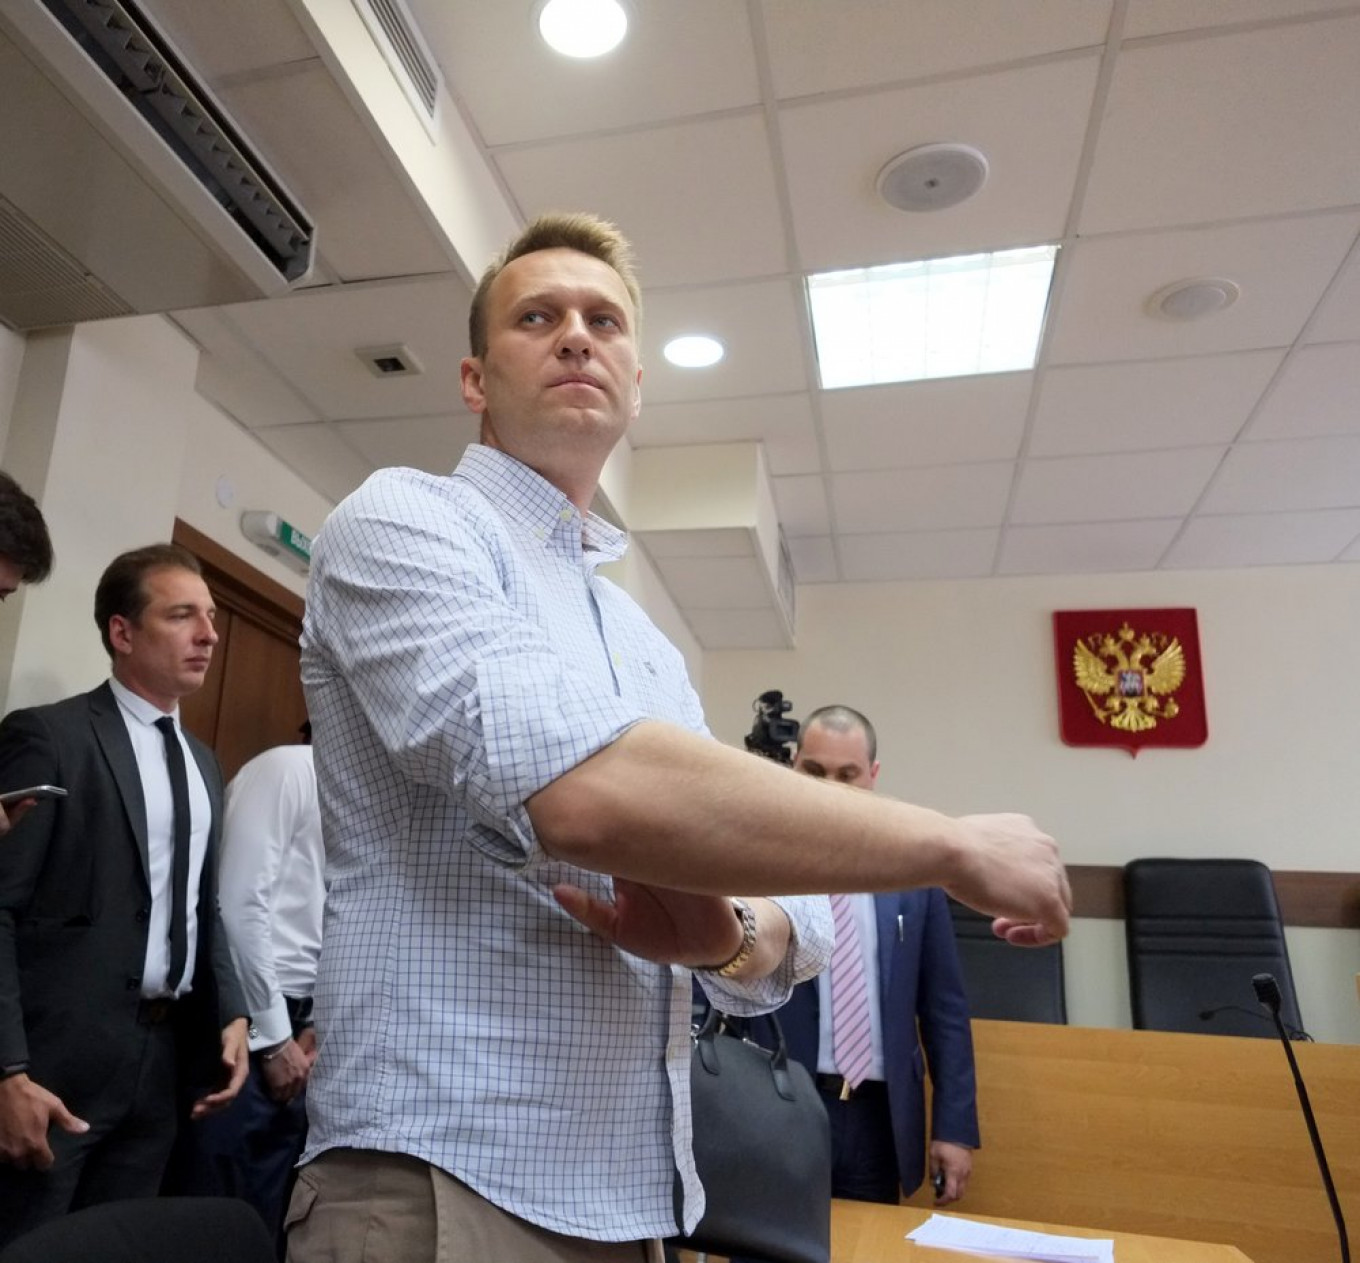 France, Germany Seek Russia Sanctions Over Navalny Poisoning